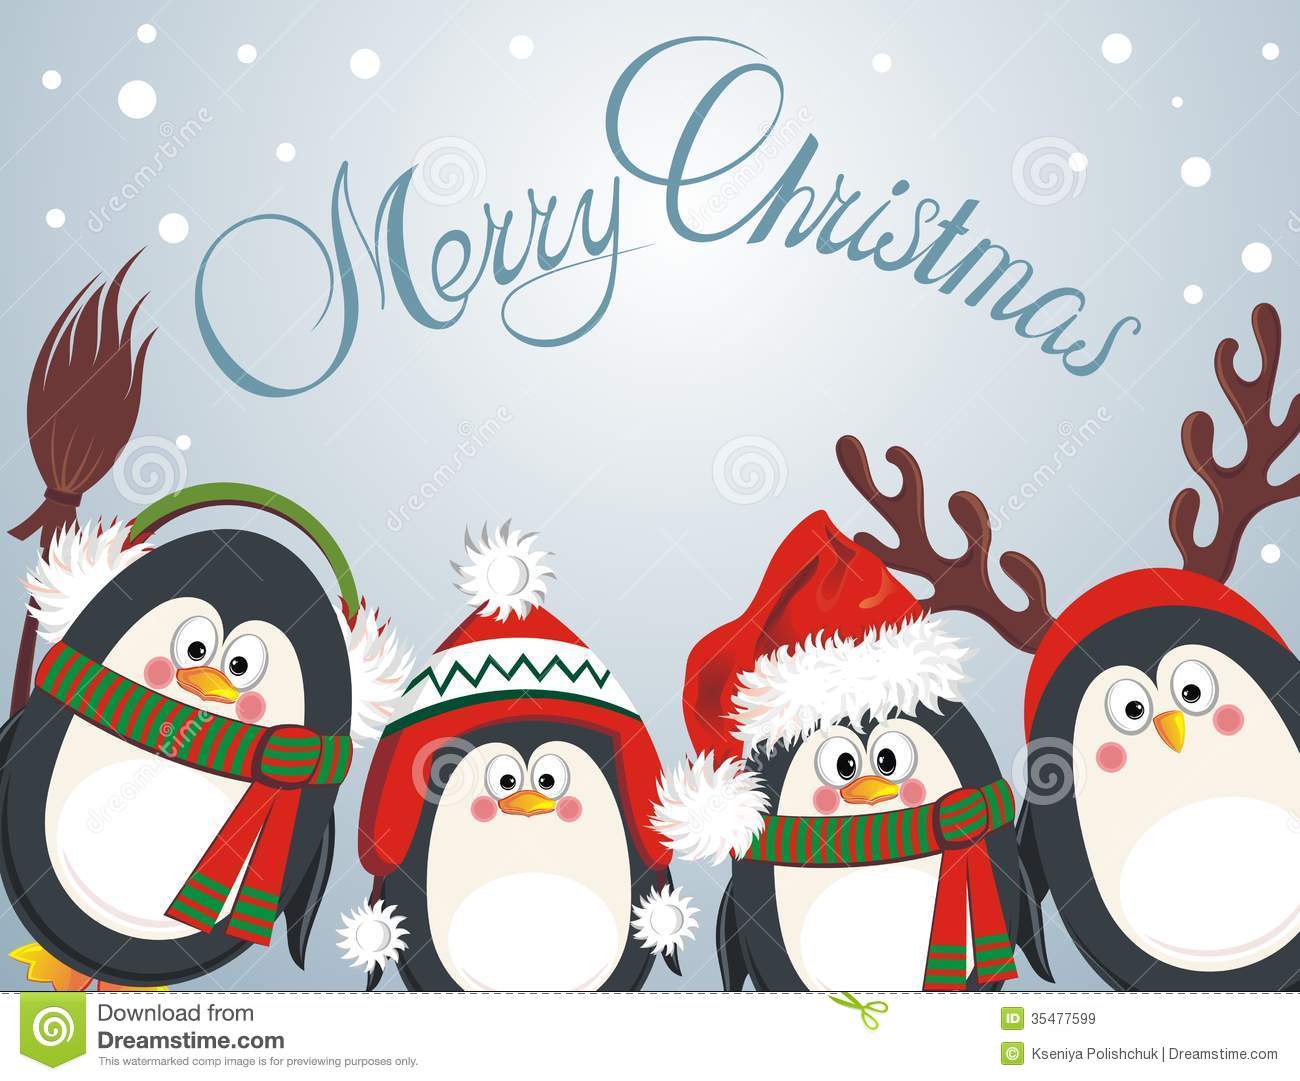 Merry Christmas Cute Penguins Royalty Free Stock Images   Image